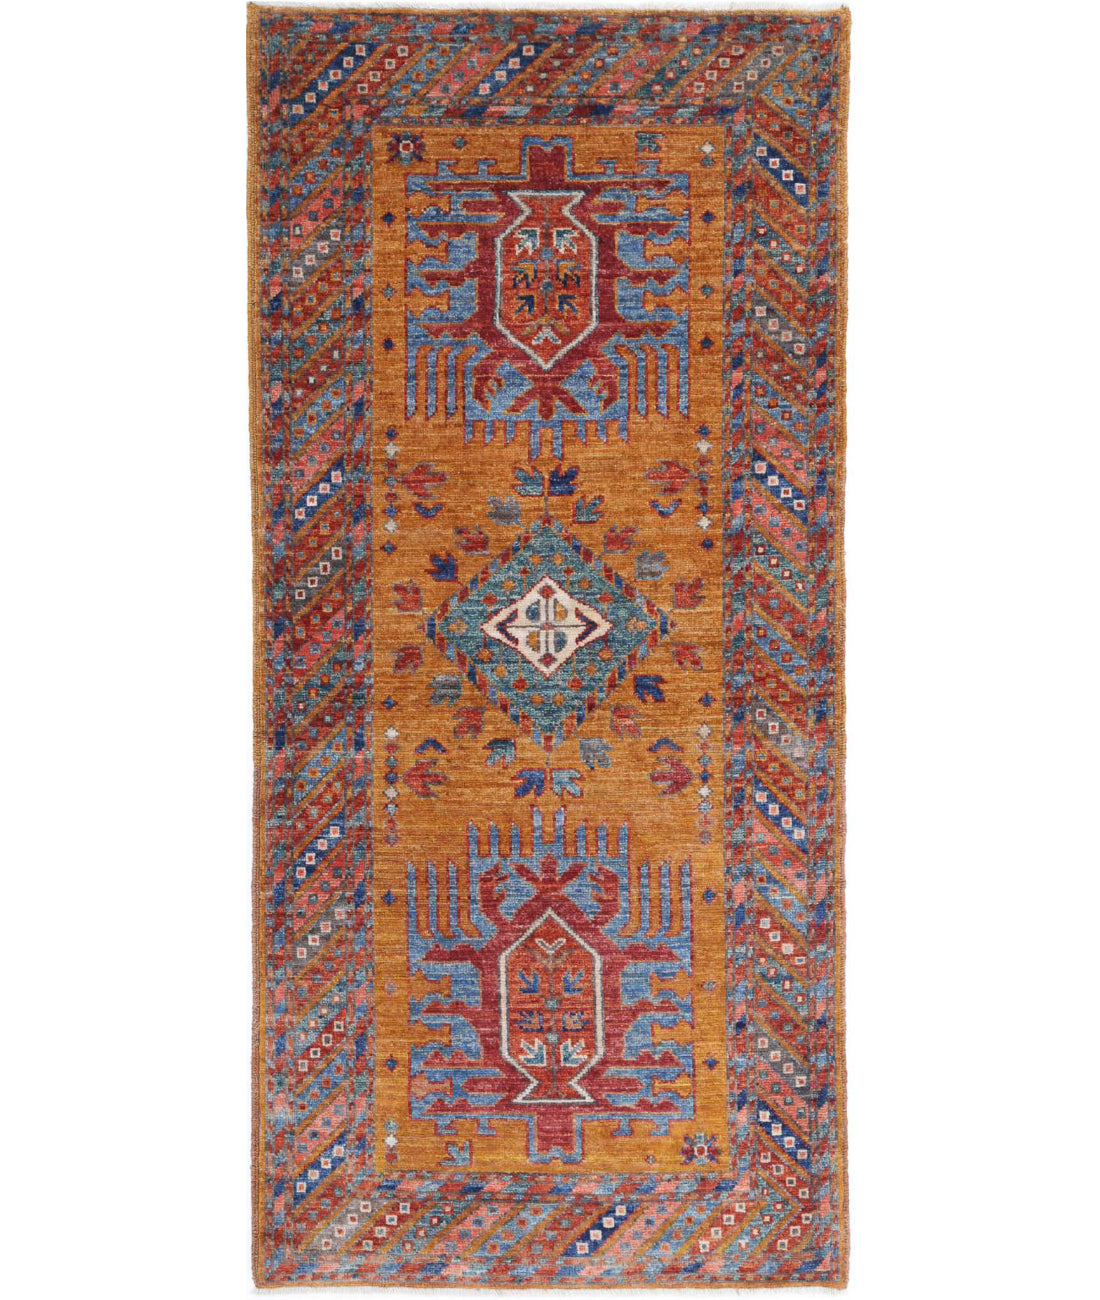 Hand Knotted Nomadic Caucasian Humna Wool Rug - 2&#39;7&#39;&#39; x 5&#39;10&#39;&#39; 2&#39;7&#39;&#39; x 5&#39;10&#39;&#39; (78 X 175) / Gold / Multi